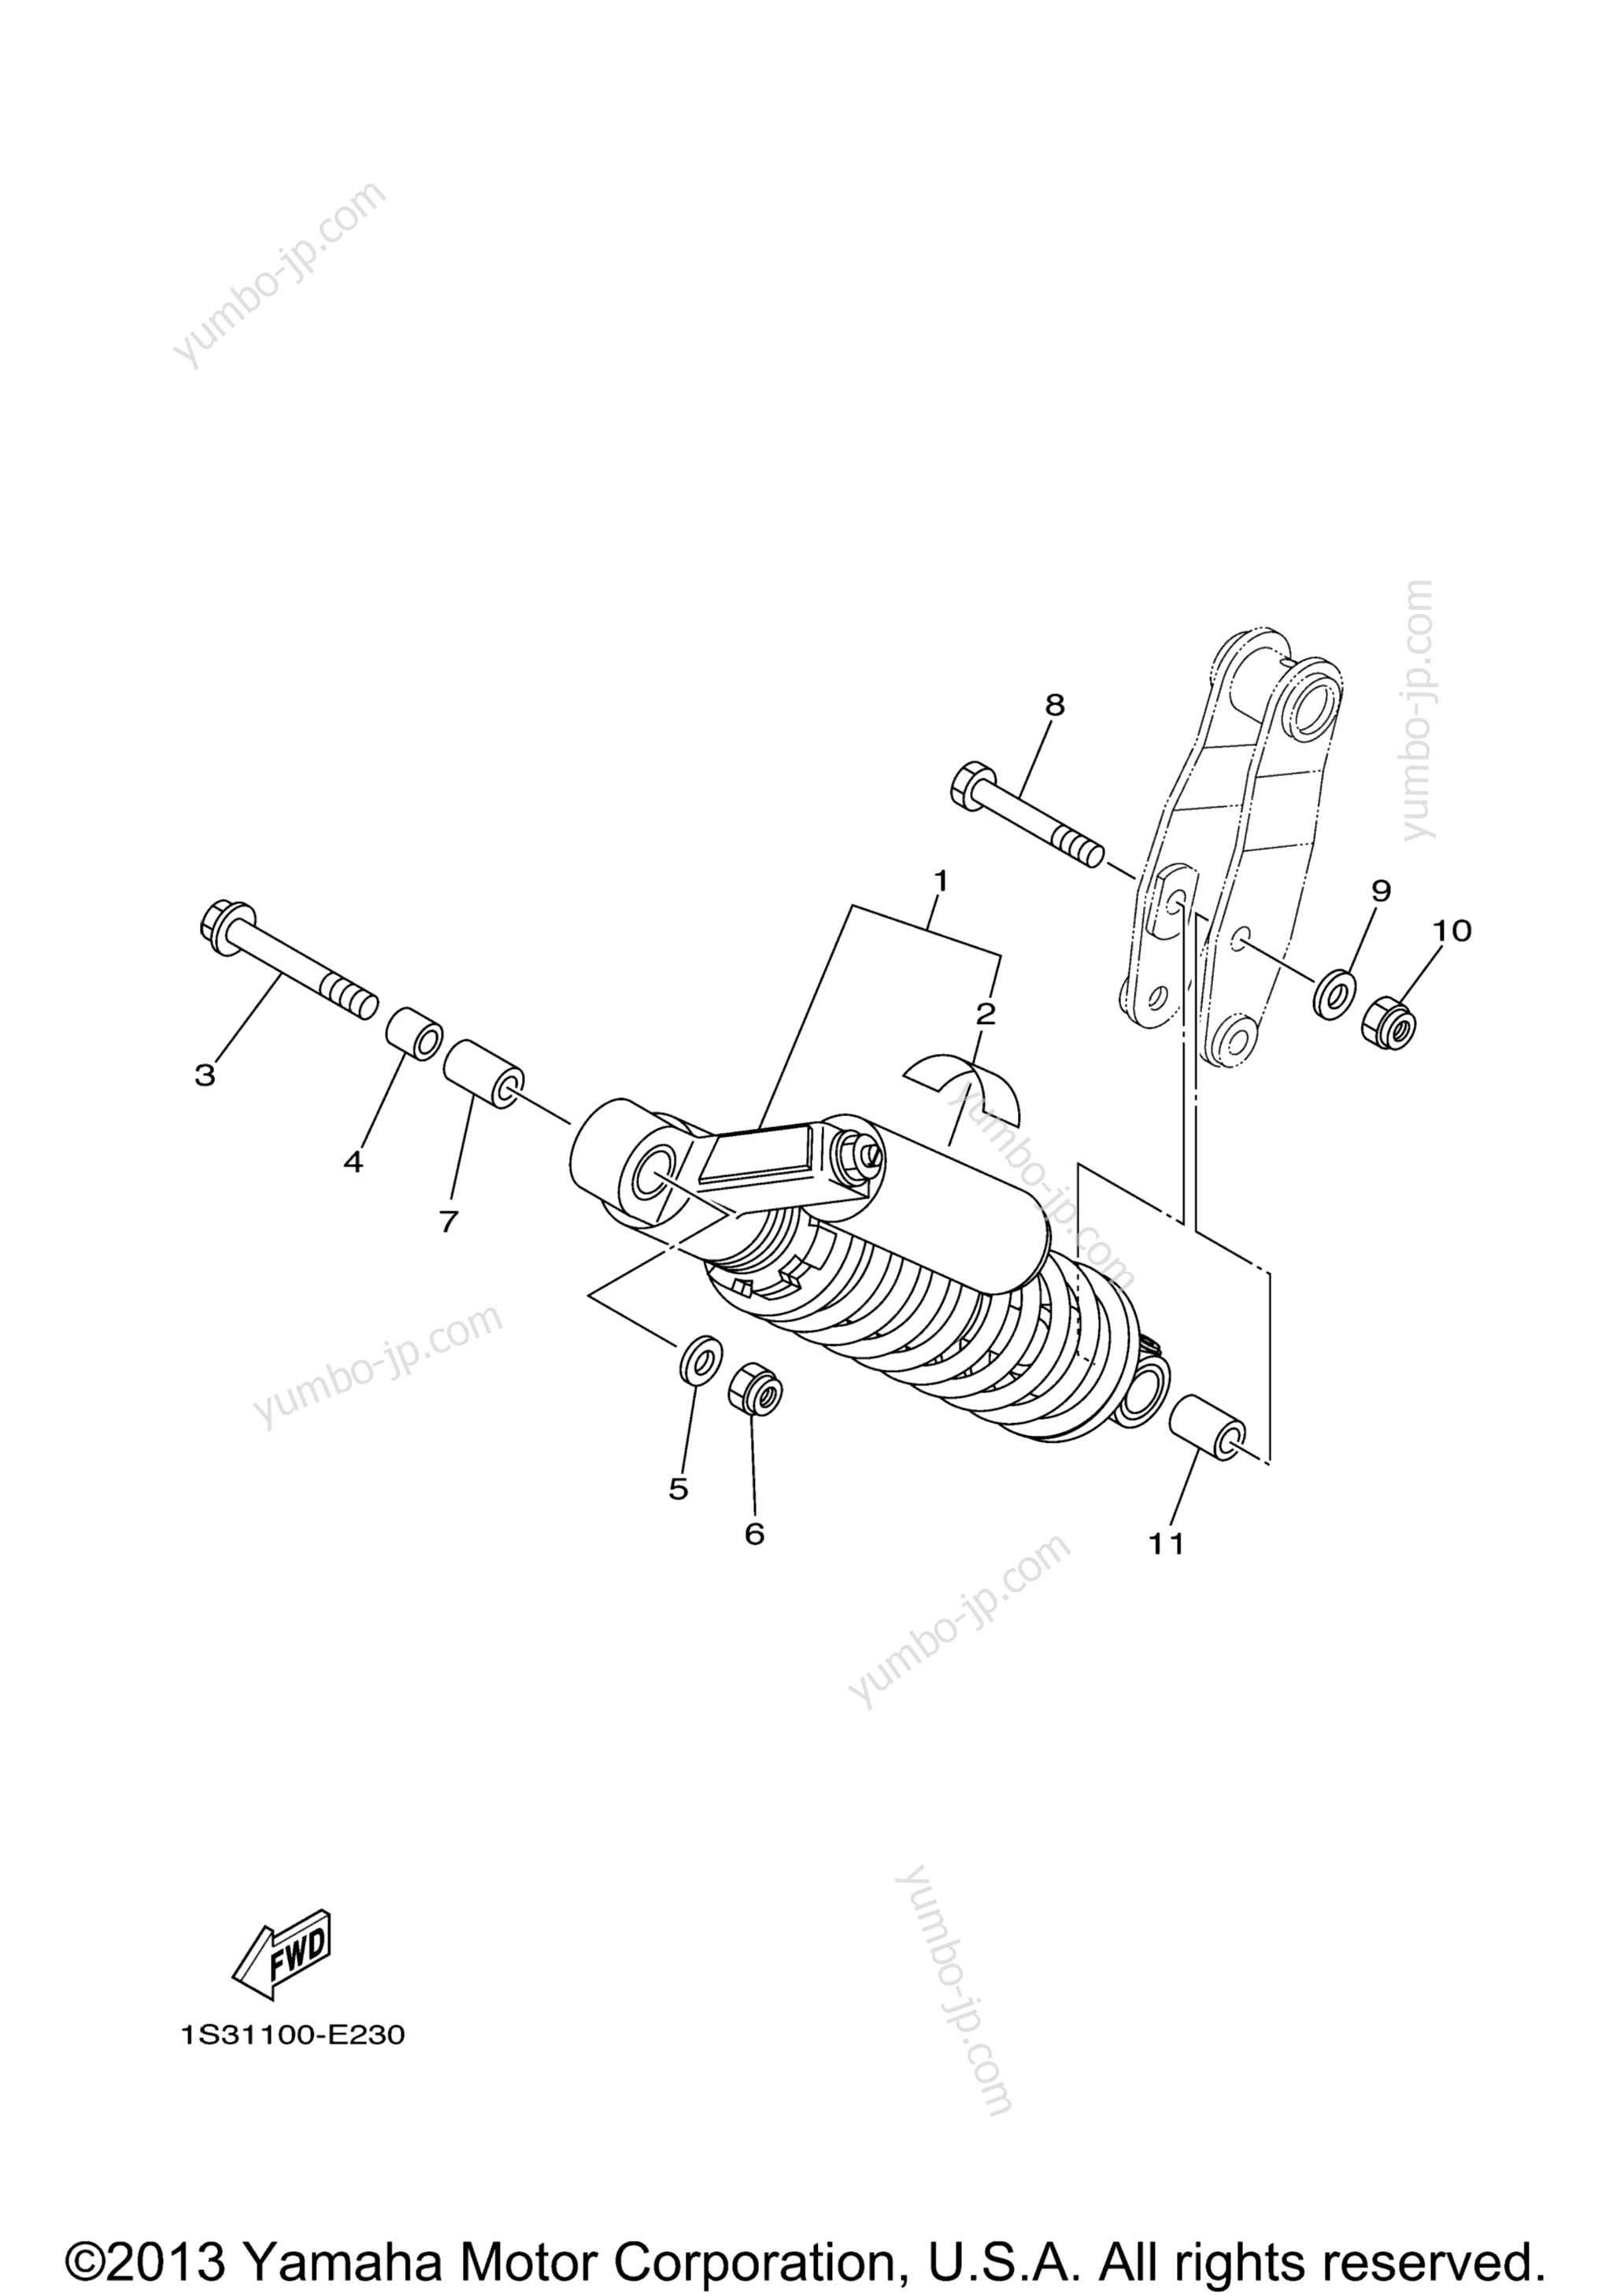 Rear Suspension for ATVs YAMAHA RAPTOR 700 SPECIAL EDITION (YFM70RSEY) 2009 year